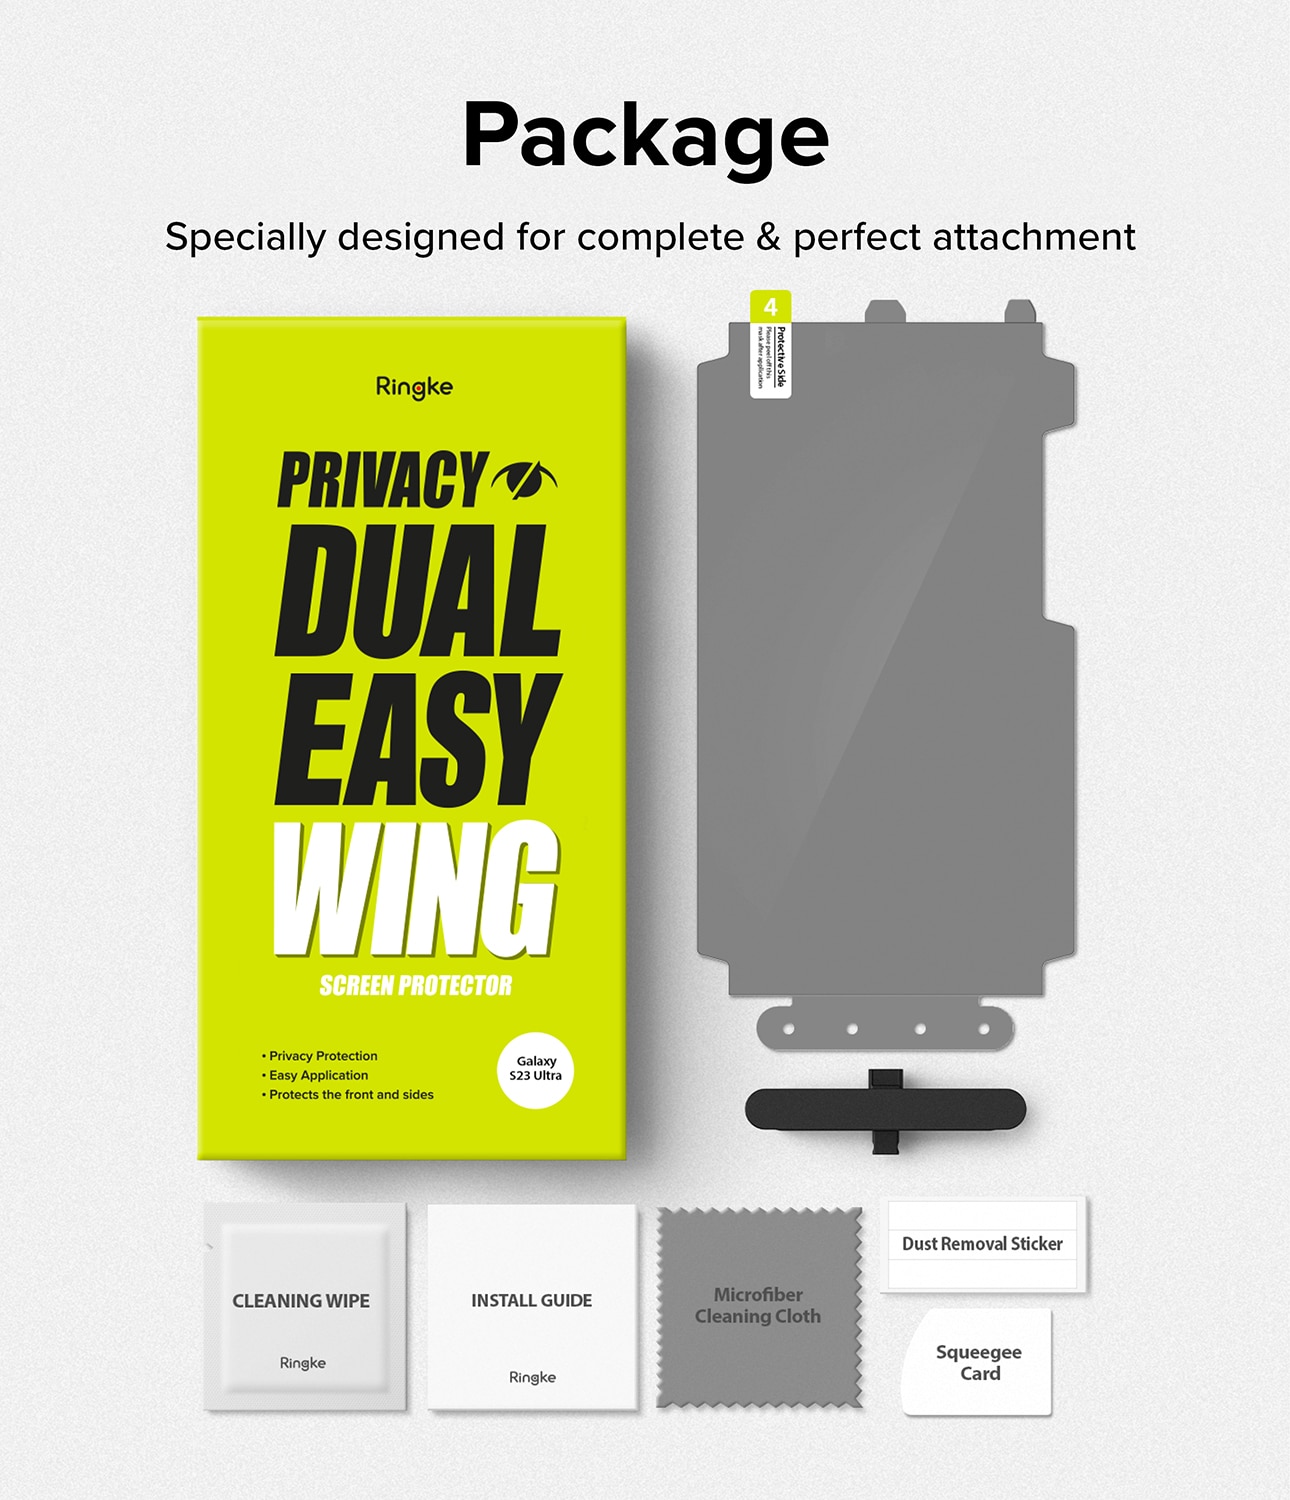 Samsung Galaxy S23 Ultra Privacy Dual Easy Wing Screen Protector